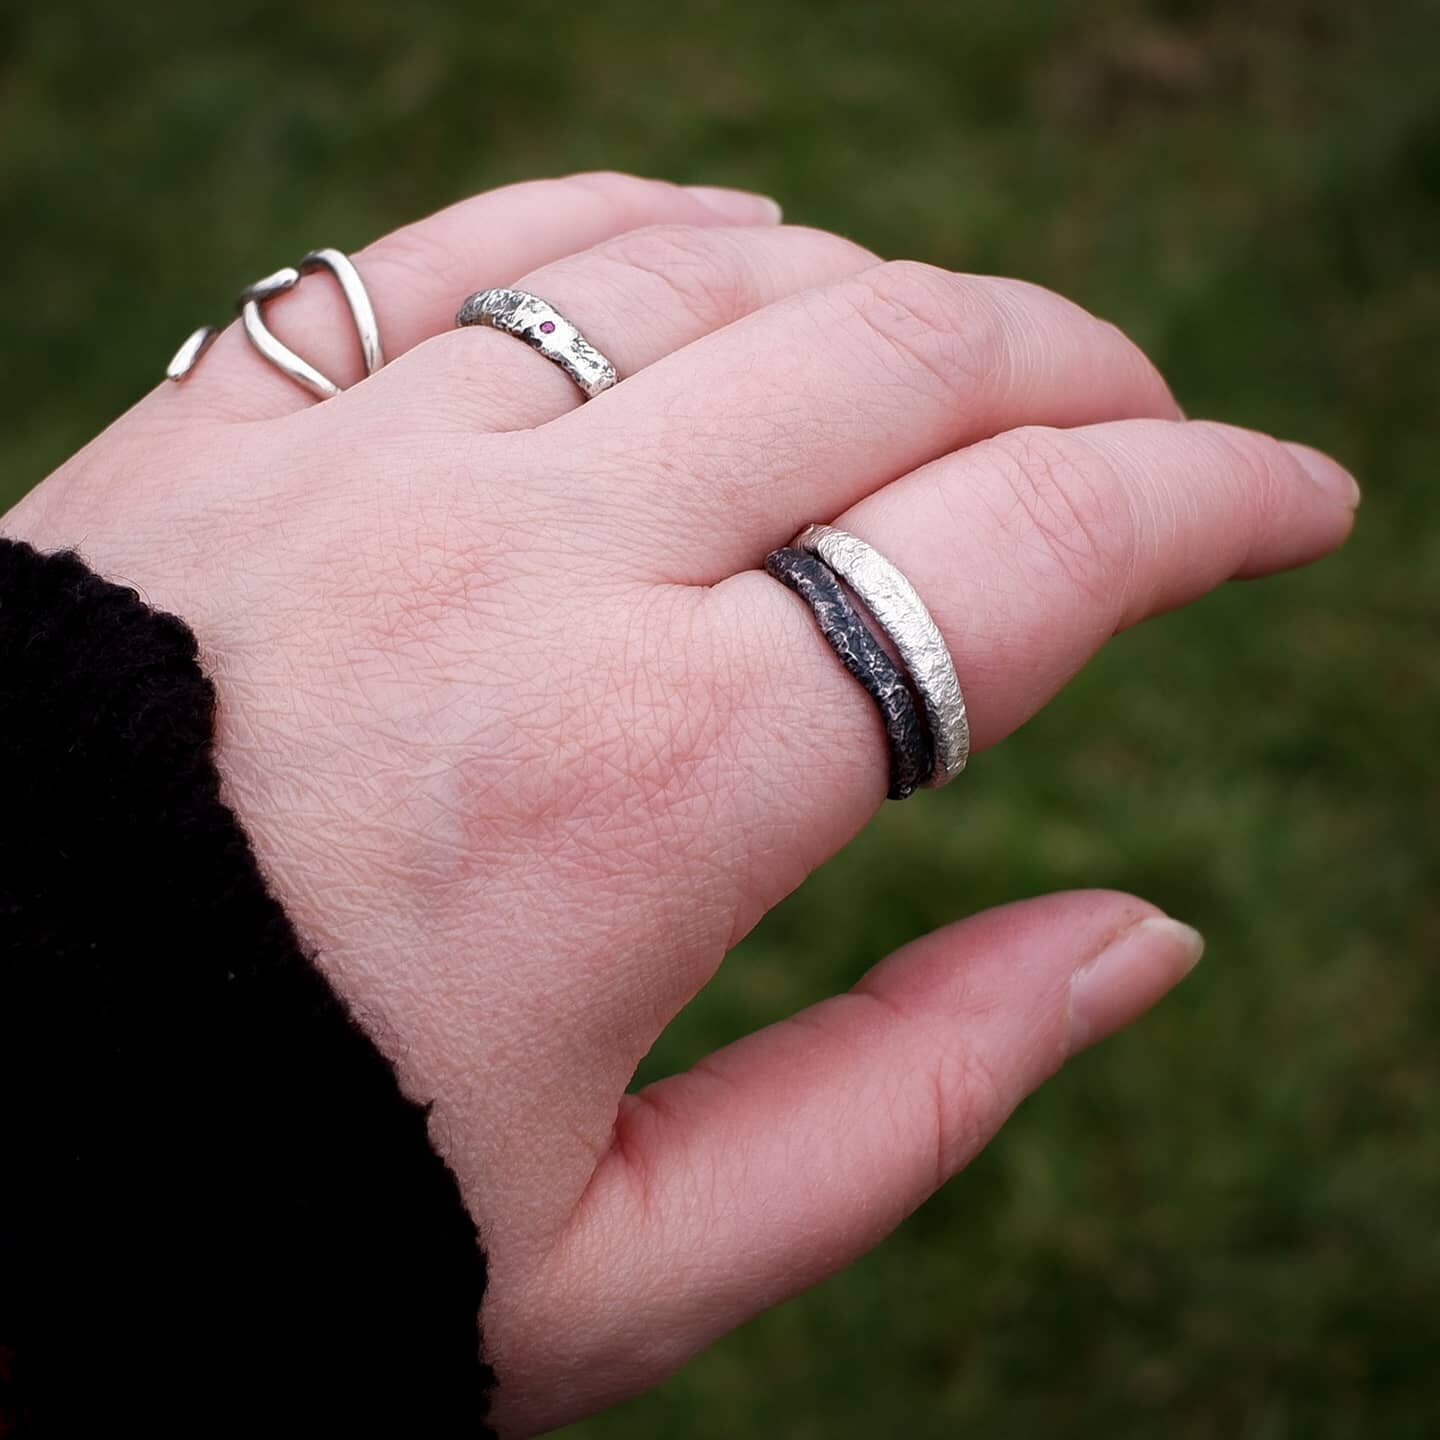 Testing how durable the fused rings are. So far so good 💪
 Especially when it comes to rings it is important to make sure the can take well demands of everyday wearing and that they are comfortable on hands. 
I think they passed the test😁 Now I wil